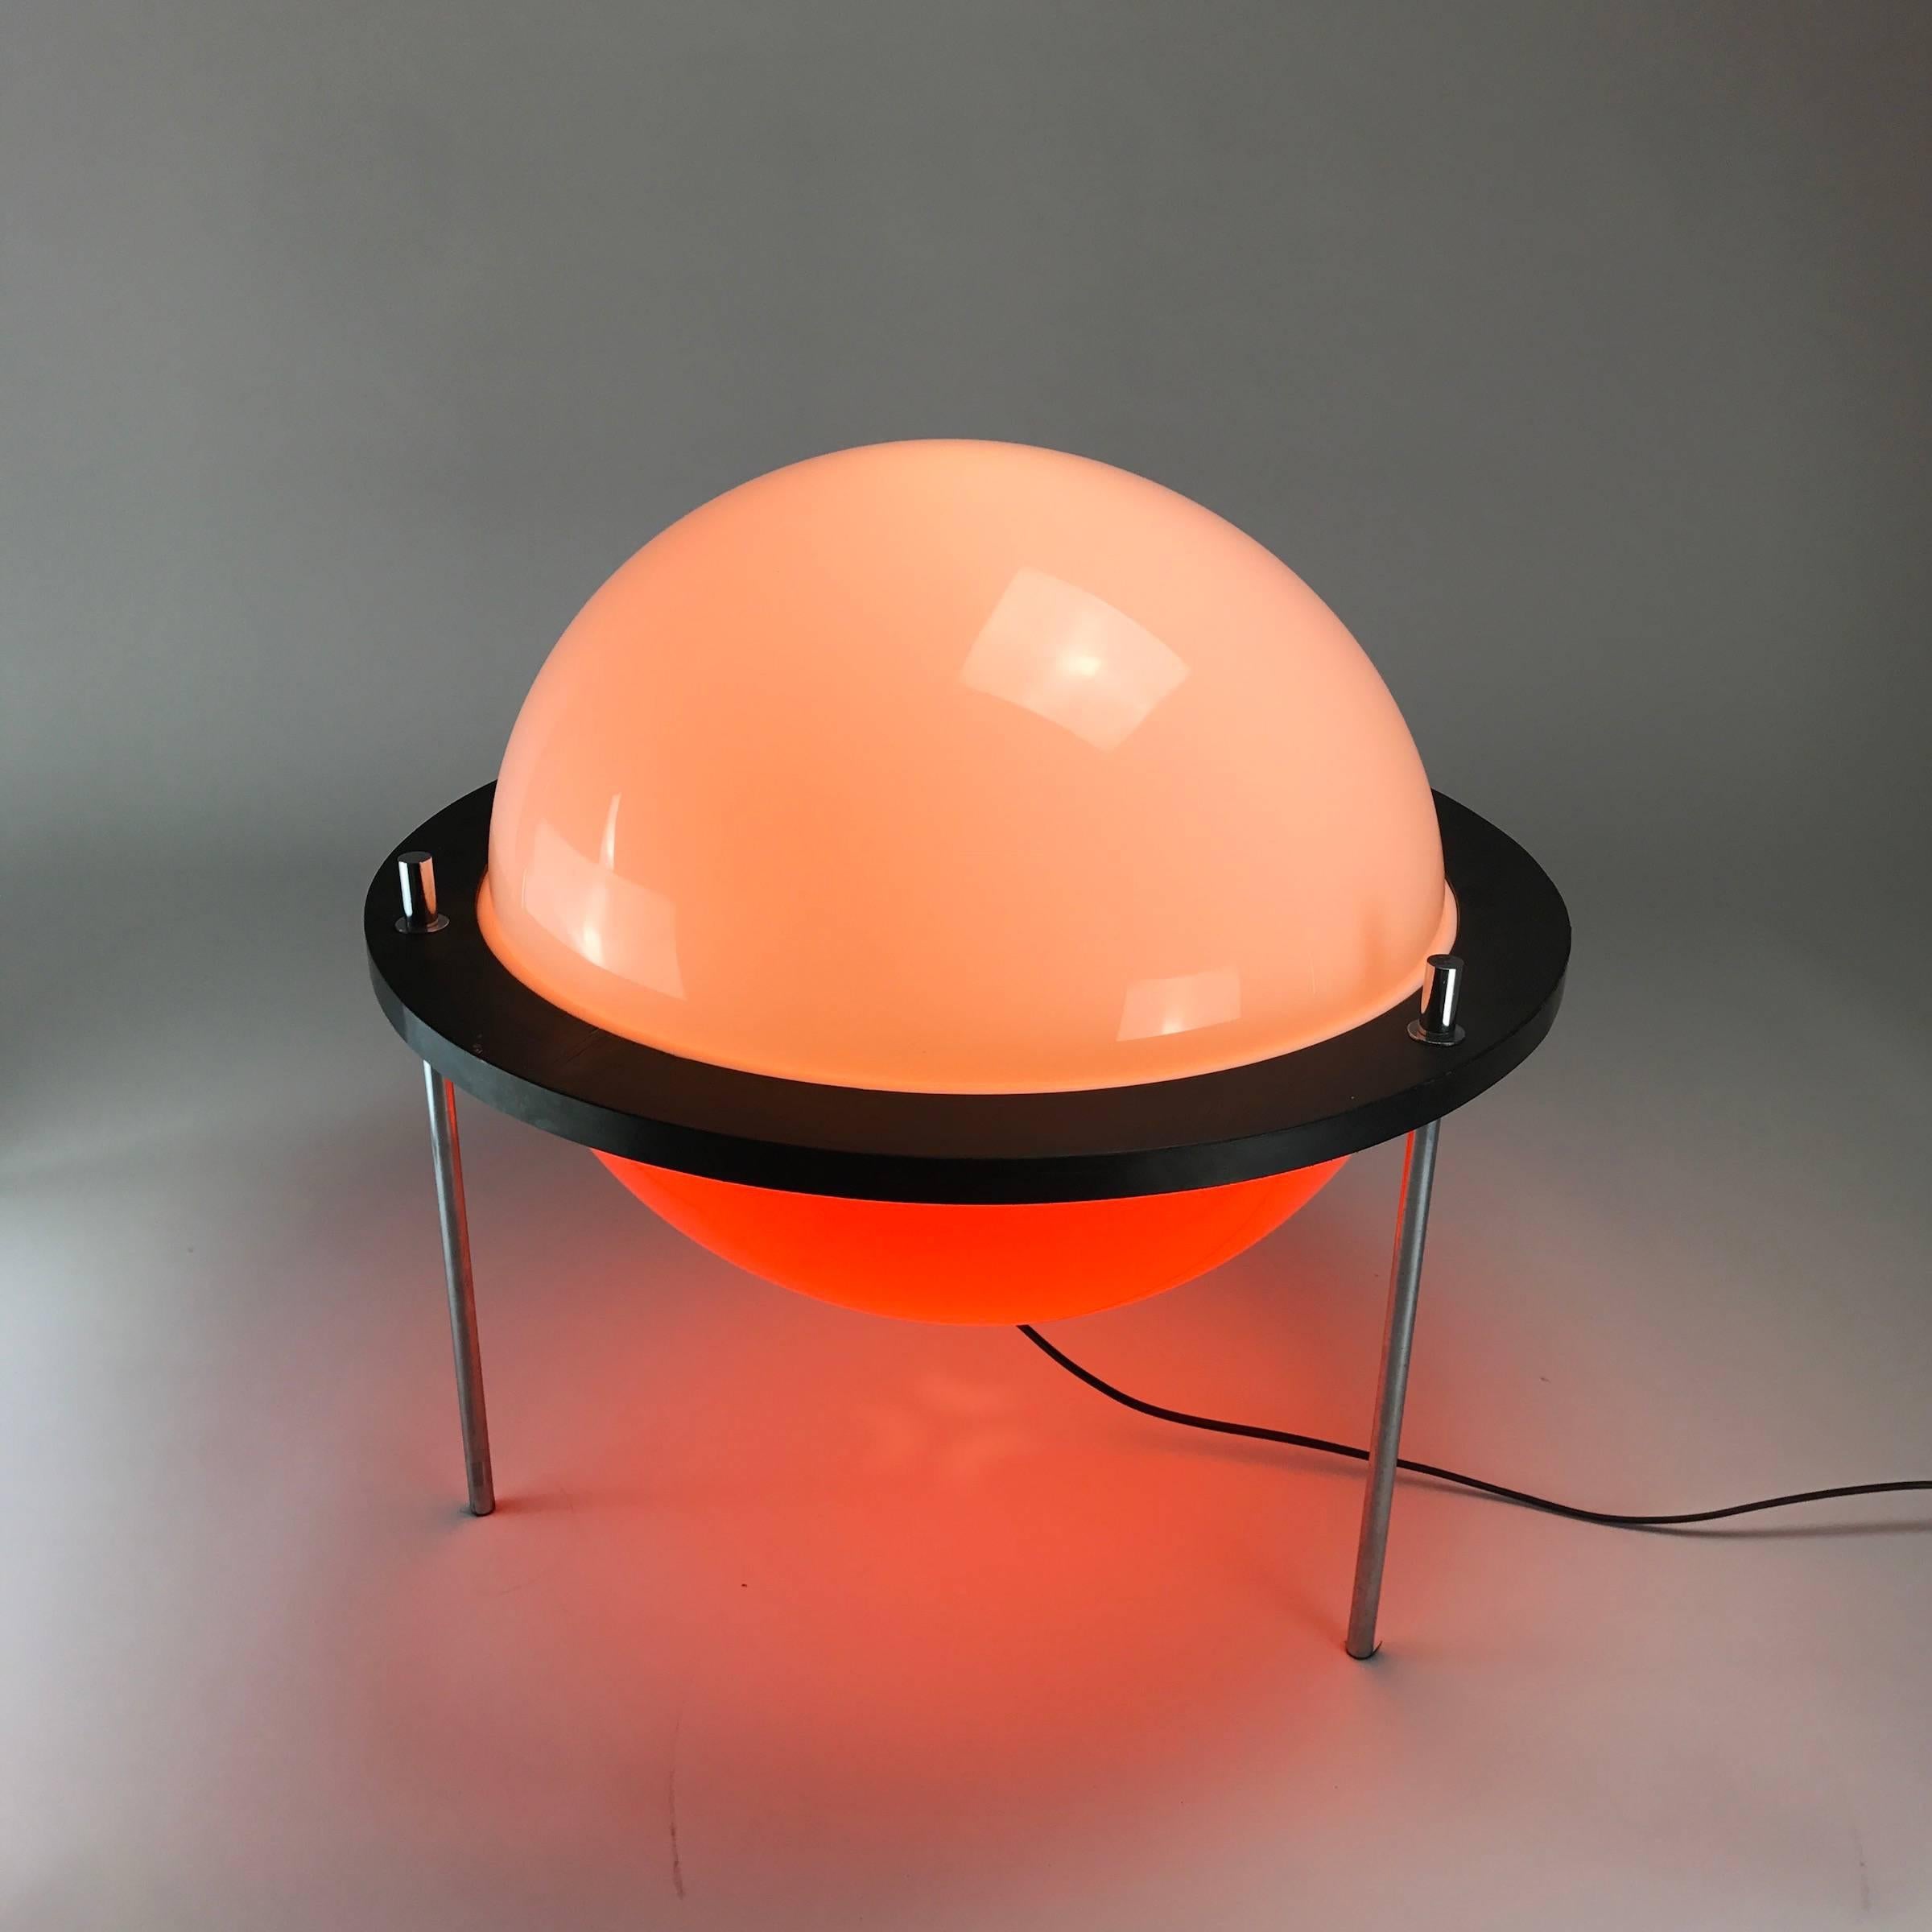 Plastic Italian Floor or Table Lamp from the Late 1960s by Harvey Guzzini